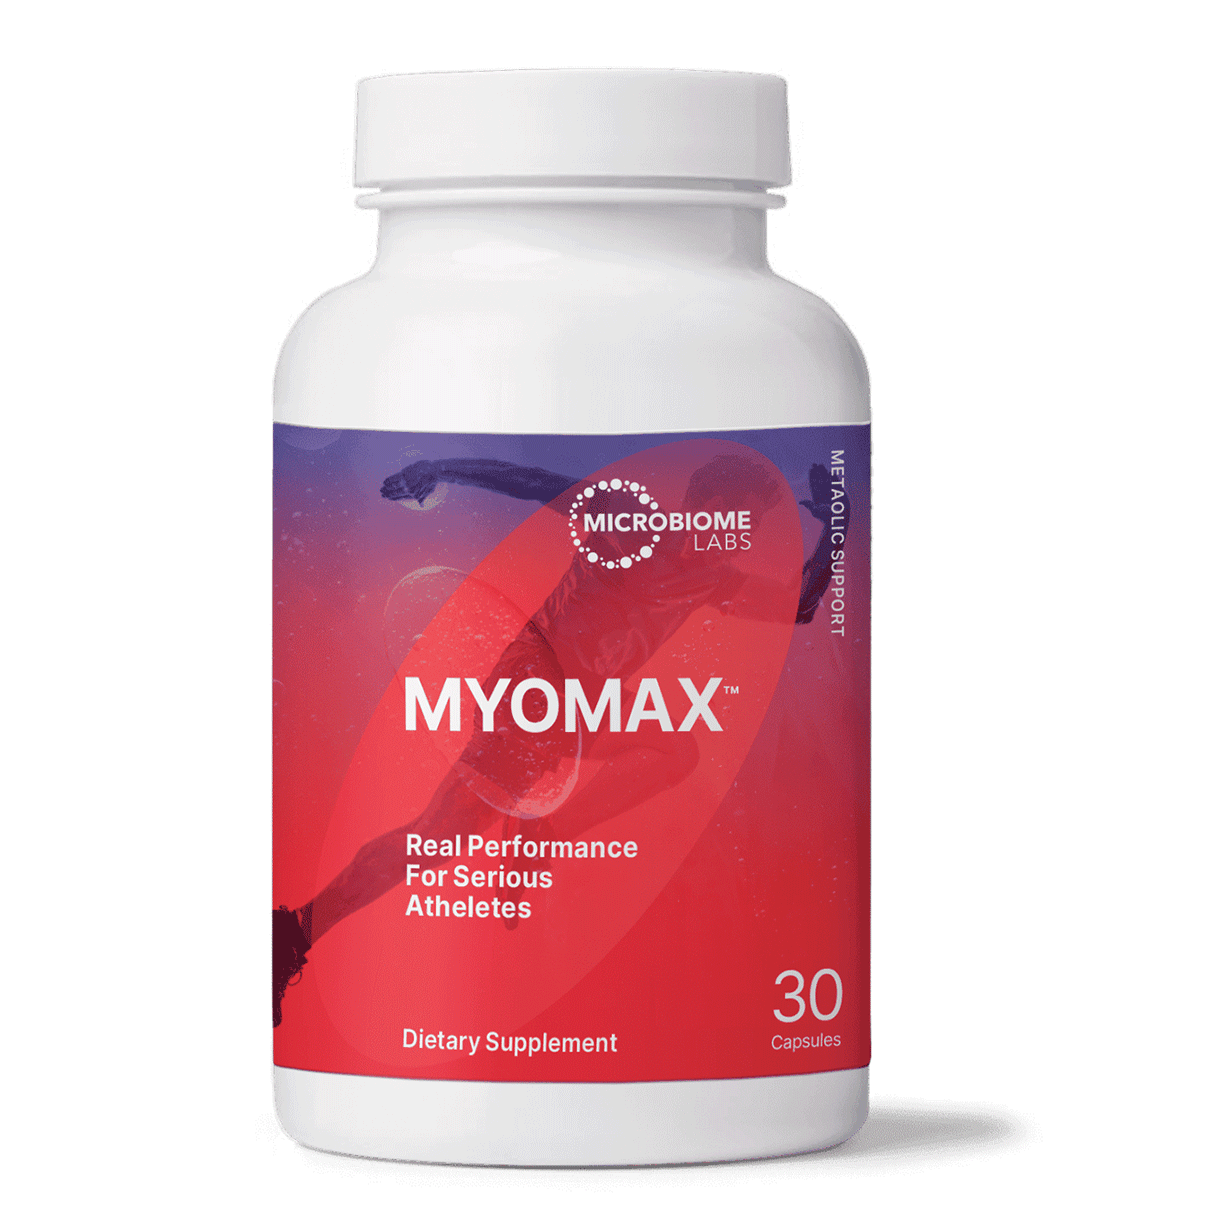 MyoMax by Microbiome Labs New Bottle